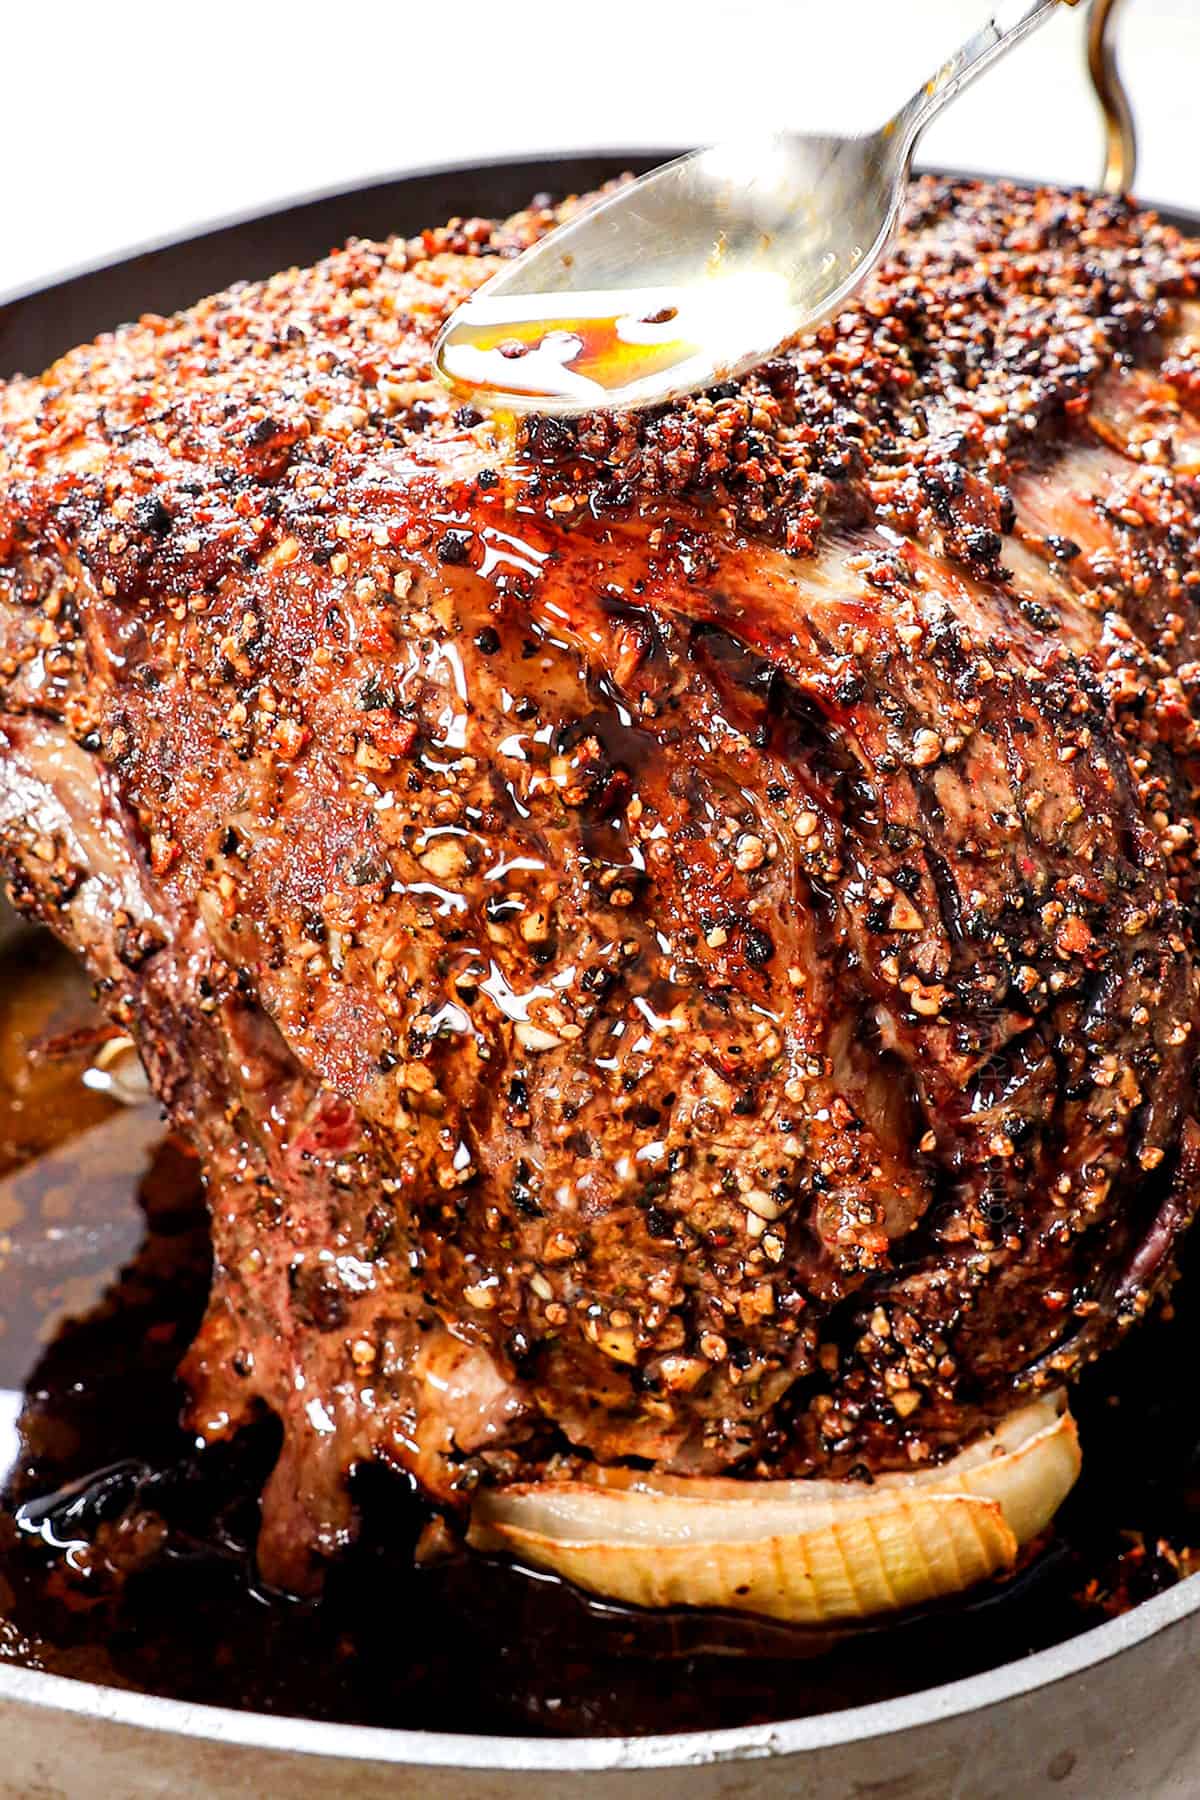 showing how to cook prime rib by basting with pan juices after roasting